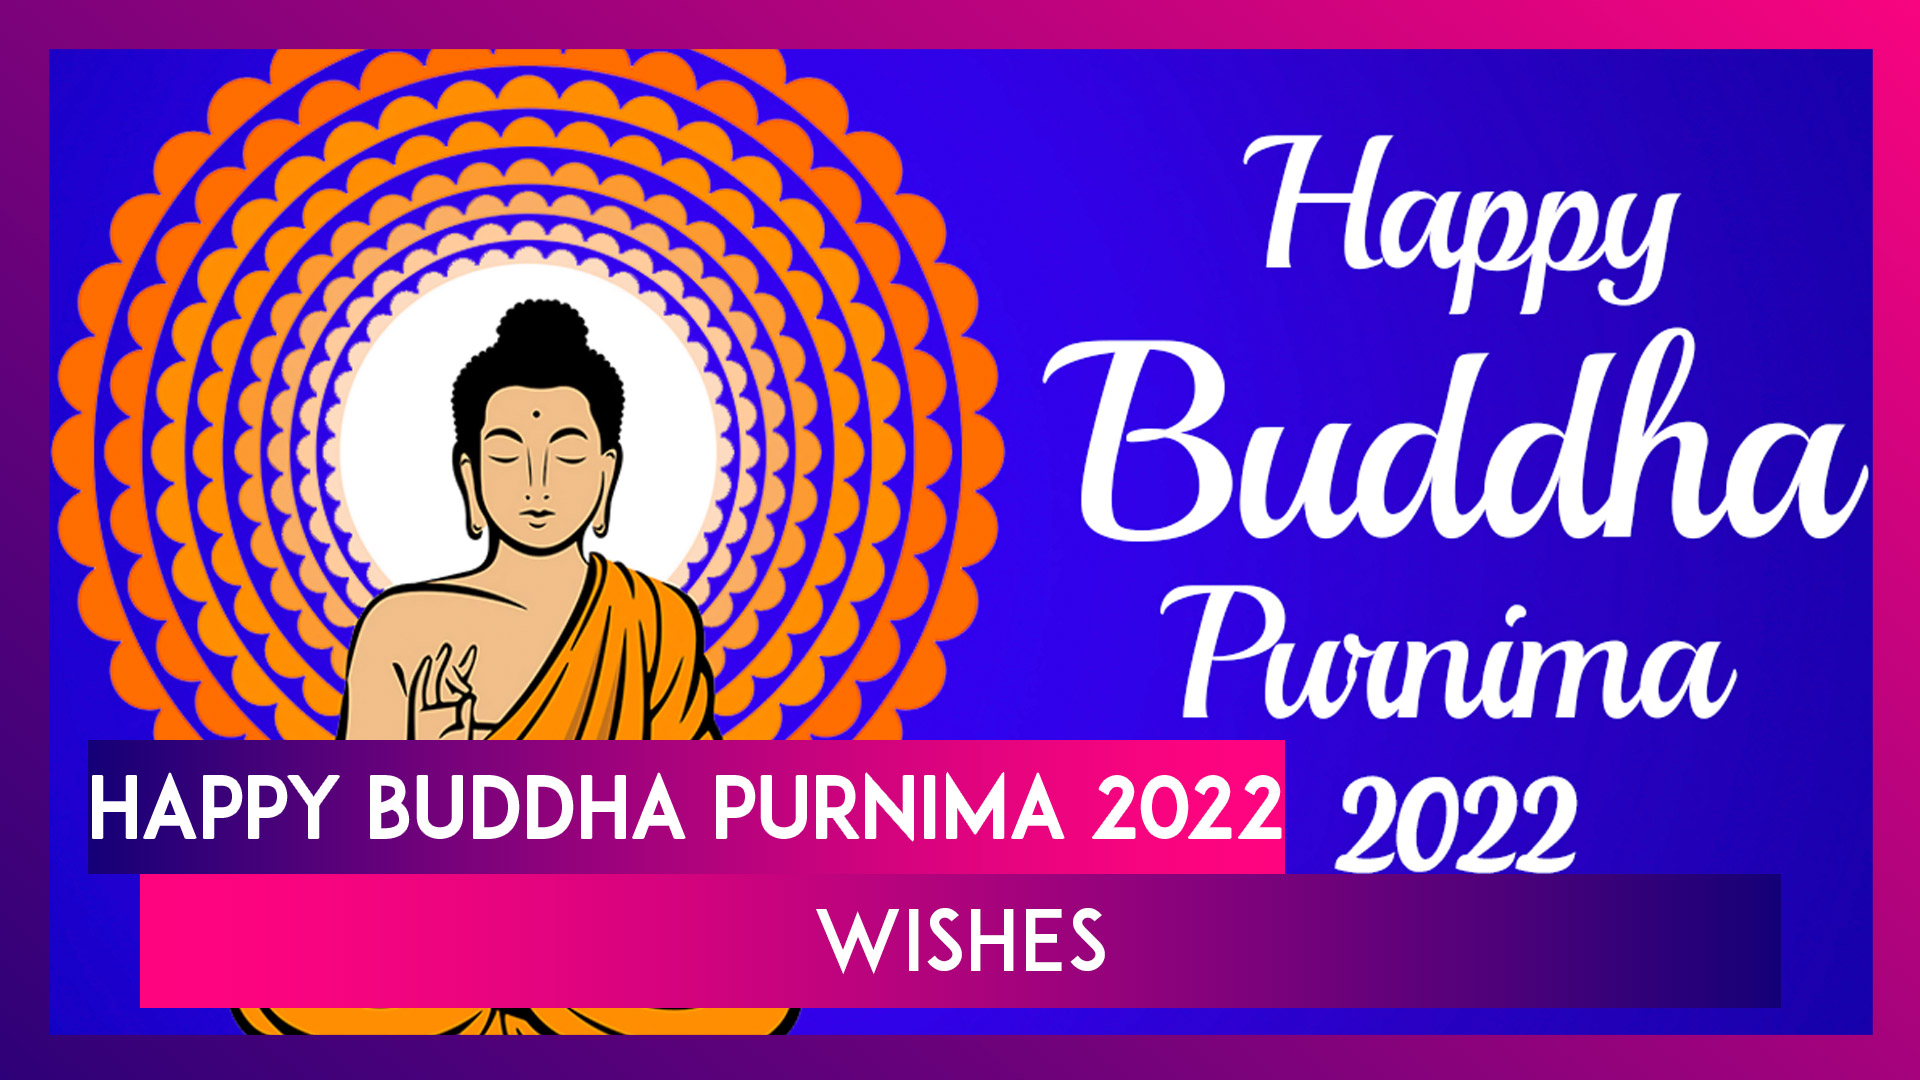 Poornima Xxx Video - Happy Buddha Purnima 2022 Wishes: Vesak Messages, Greetings & Wallpapers To  Celebrate the Pious Day | ðŸ“¹ Watch Videos From LatestLY